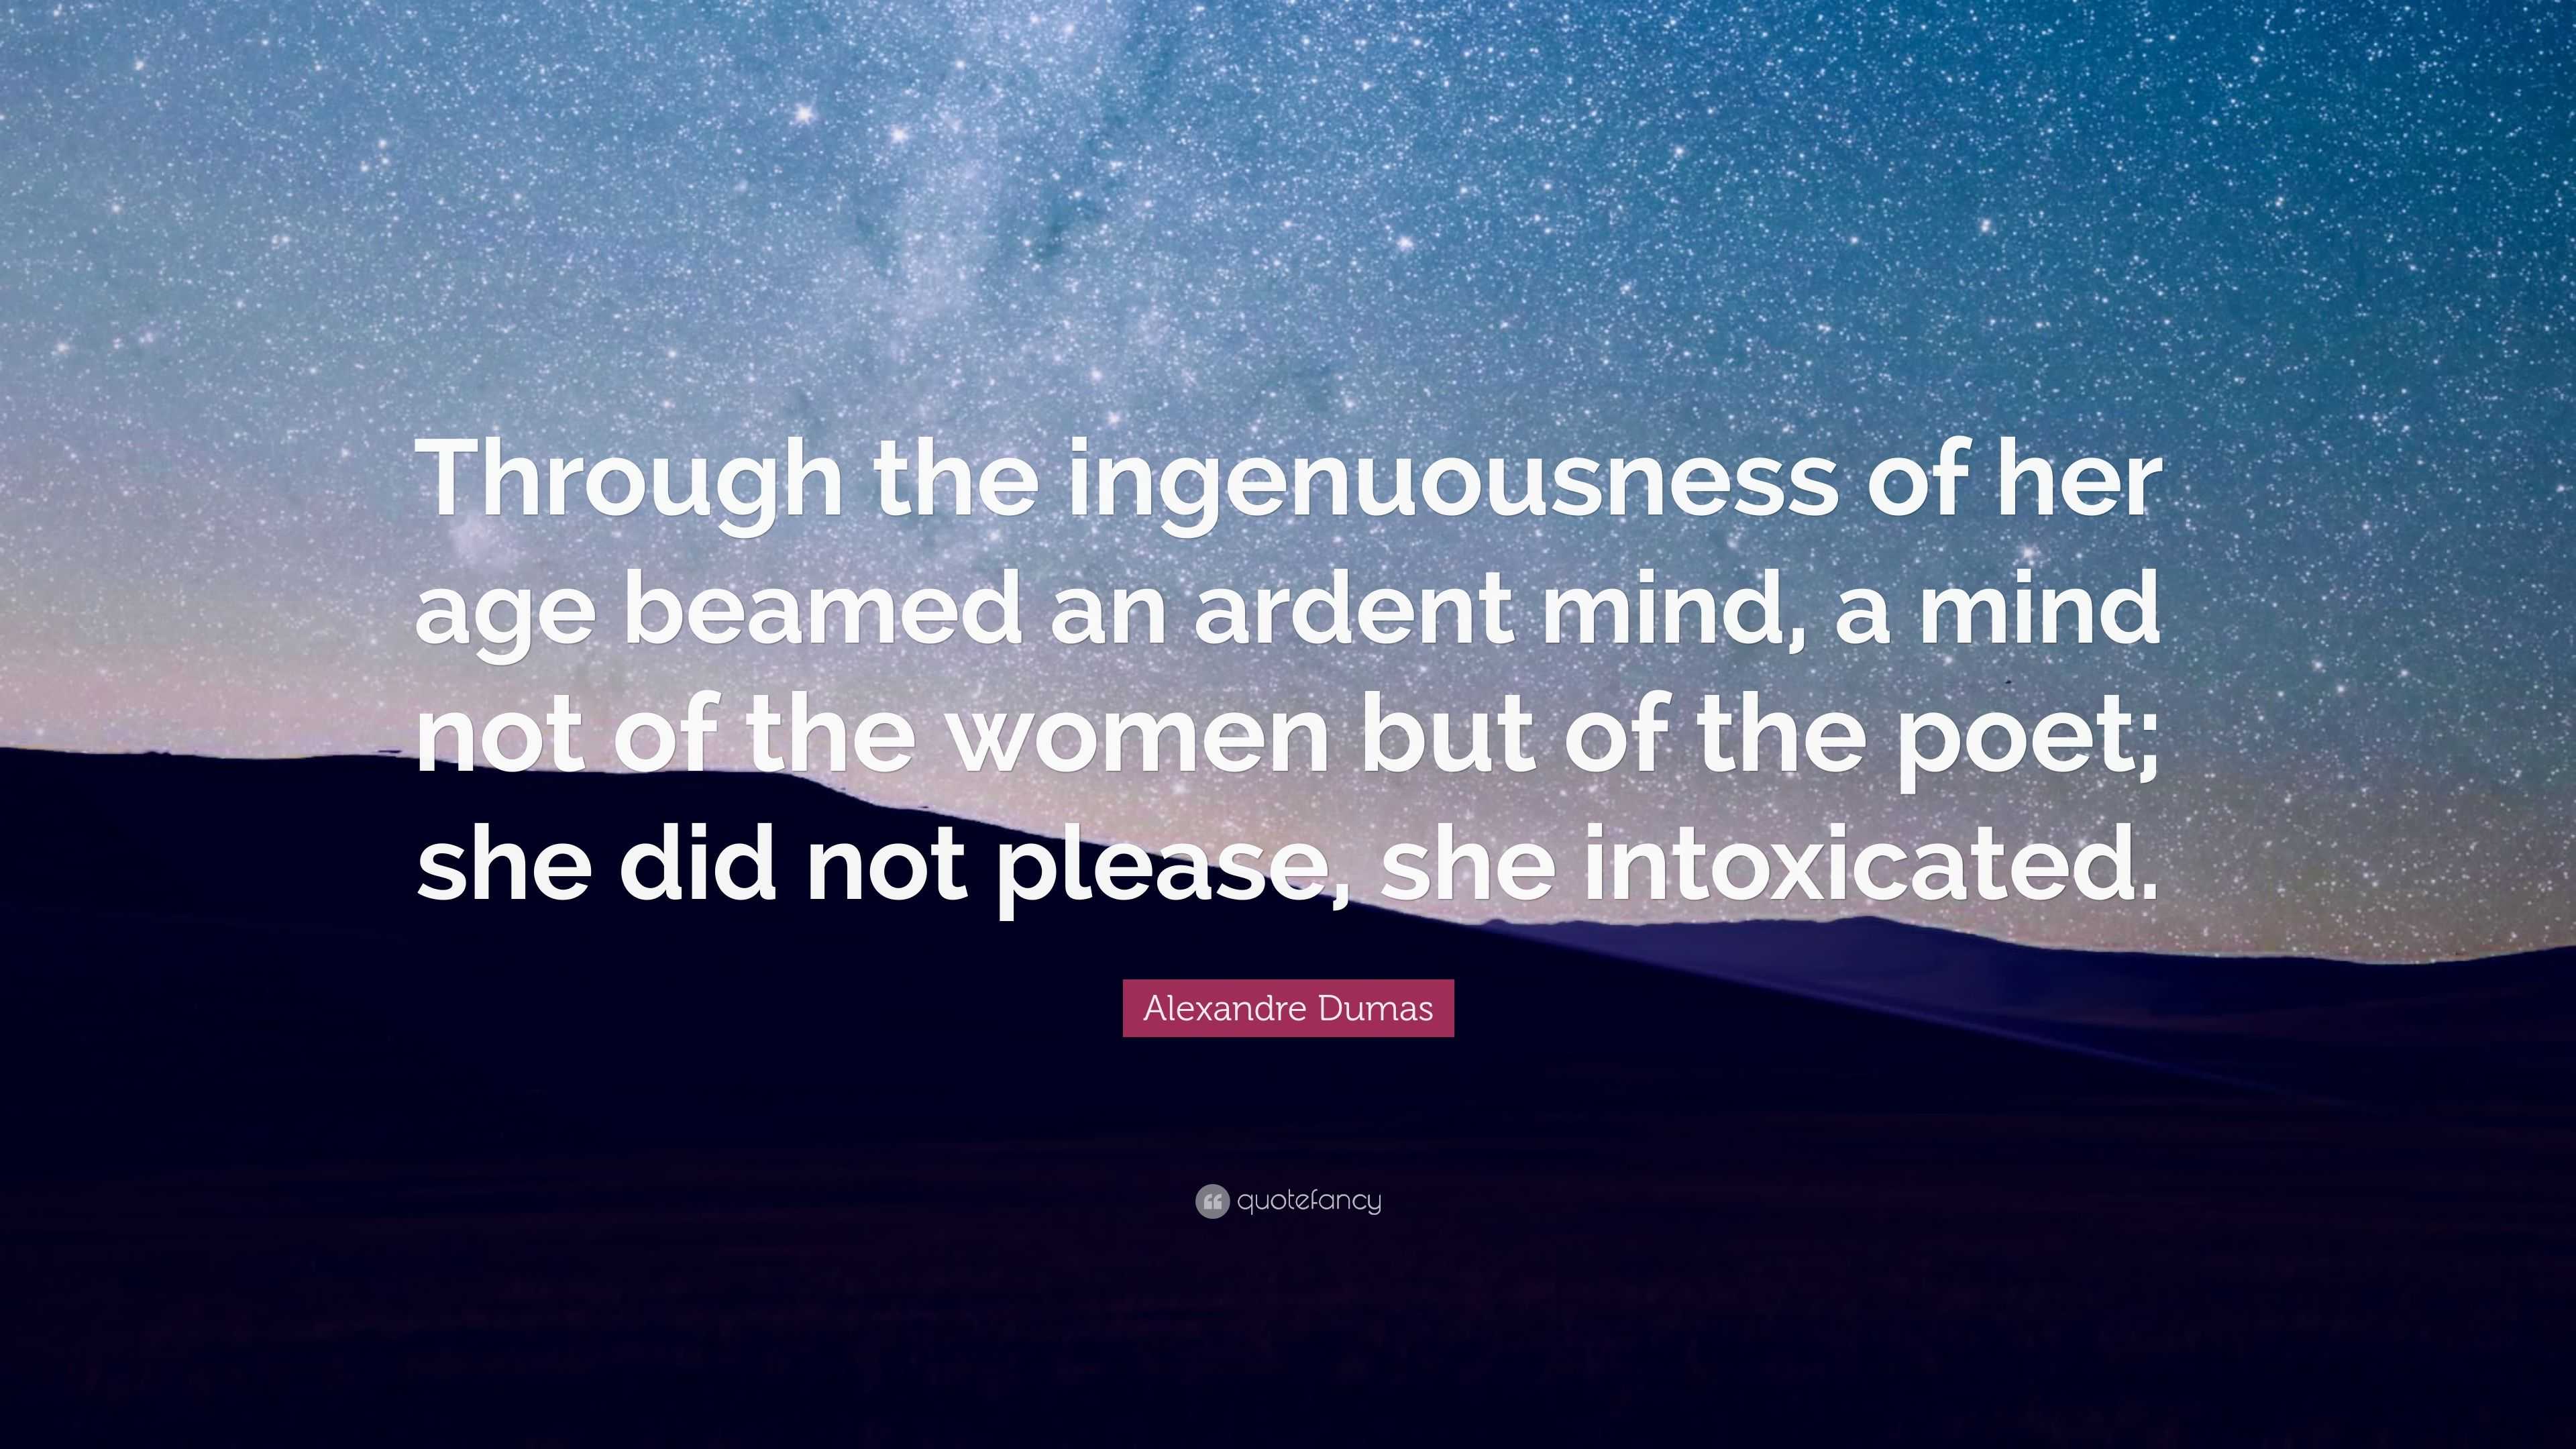 Alexandre Dumas Quote: “Through the ingenuousness of her age beamed an ...